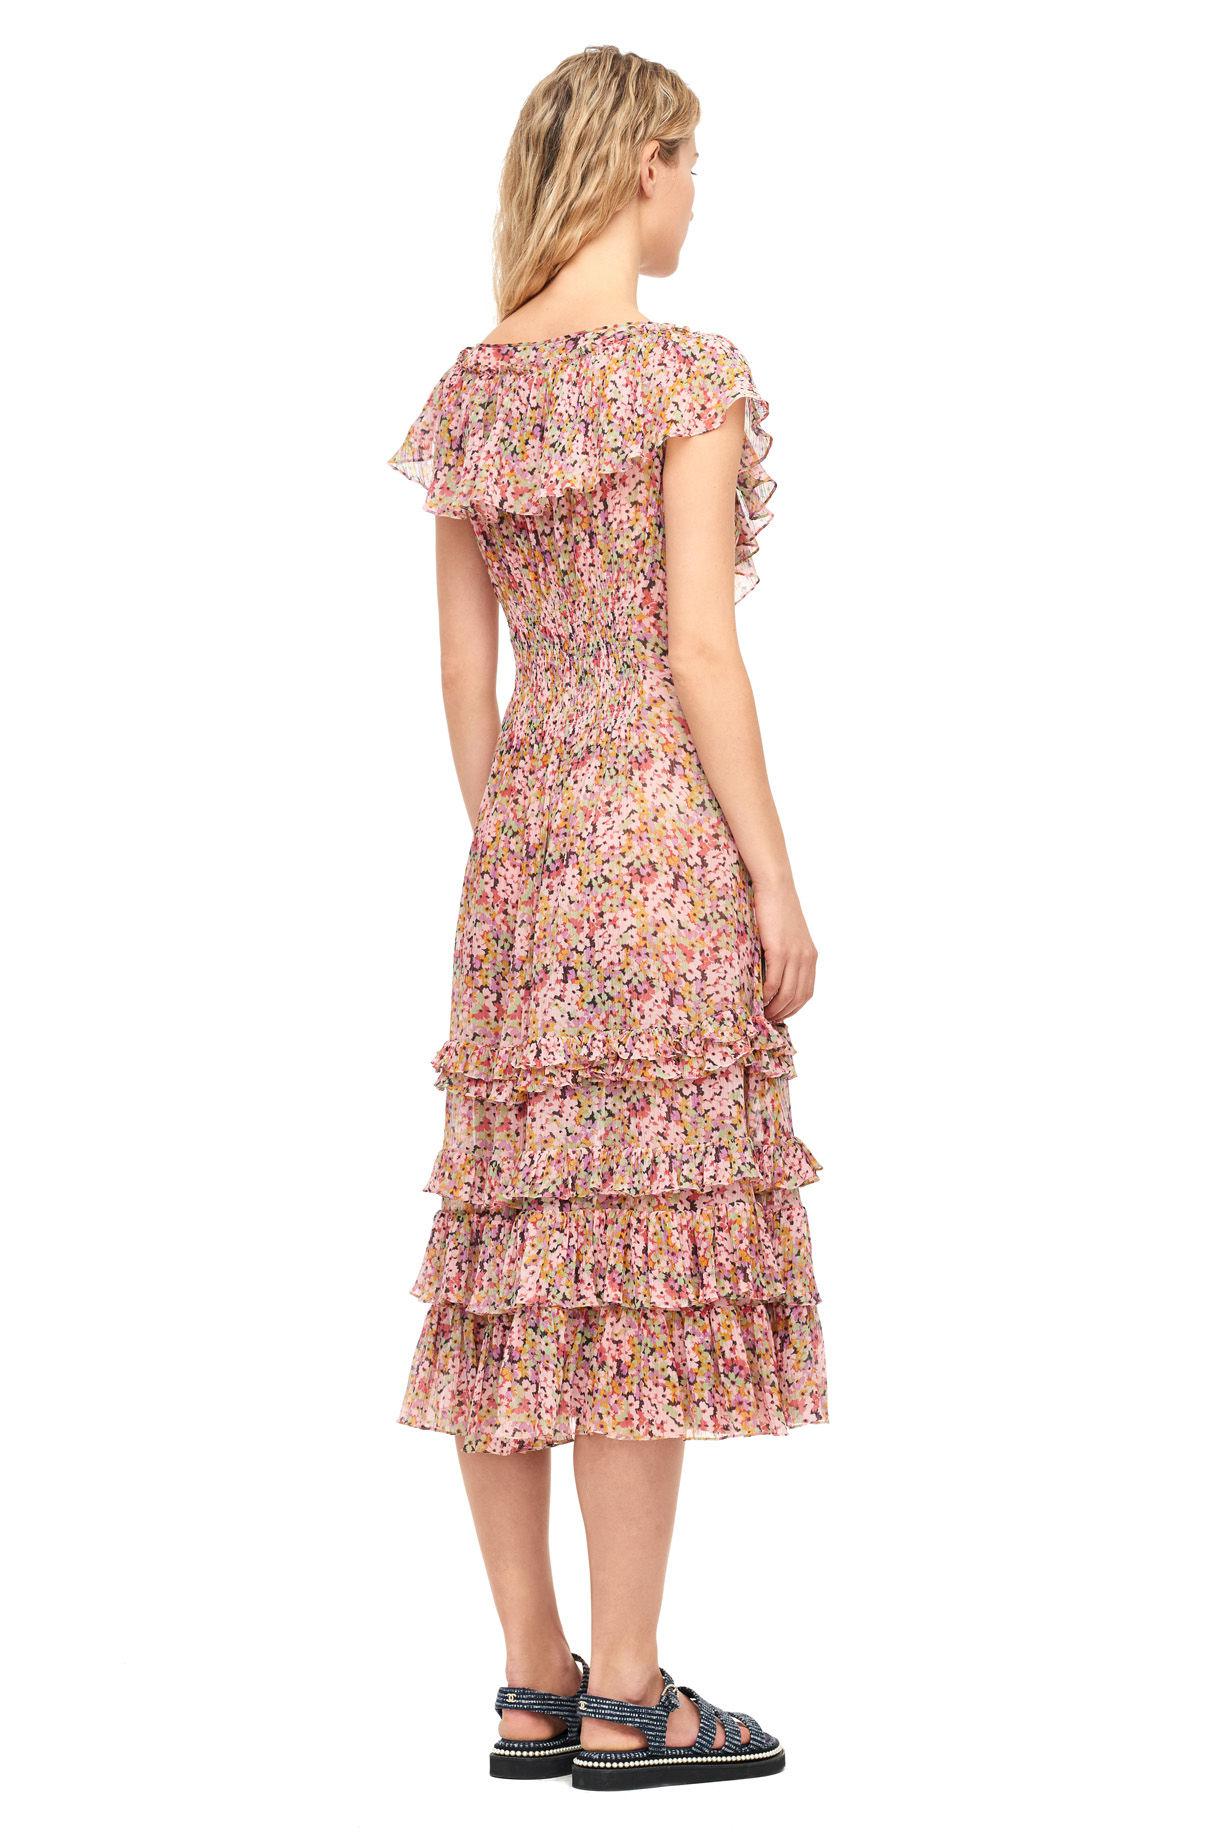 Rebecca Taylor Margo Floral Silk Cotton Voile Ruffle Dress in Pink - Lyst